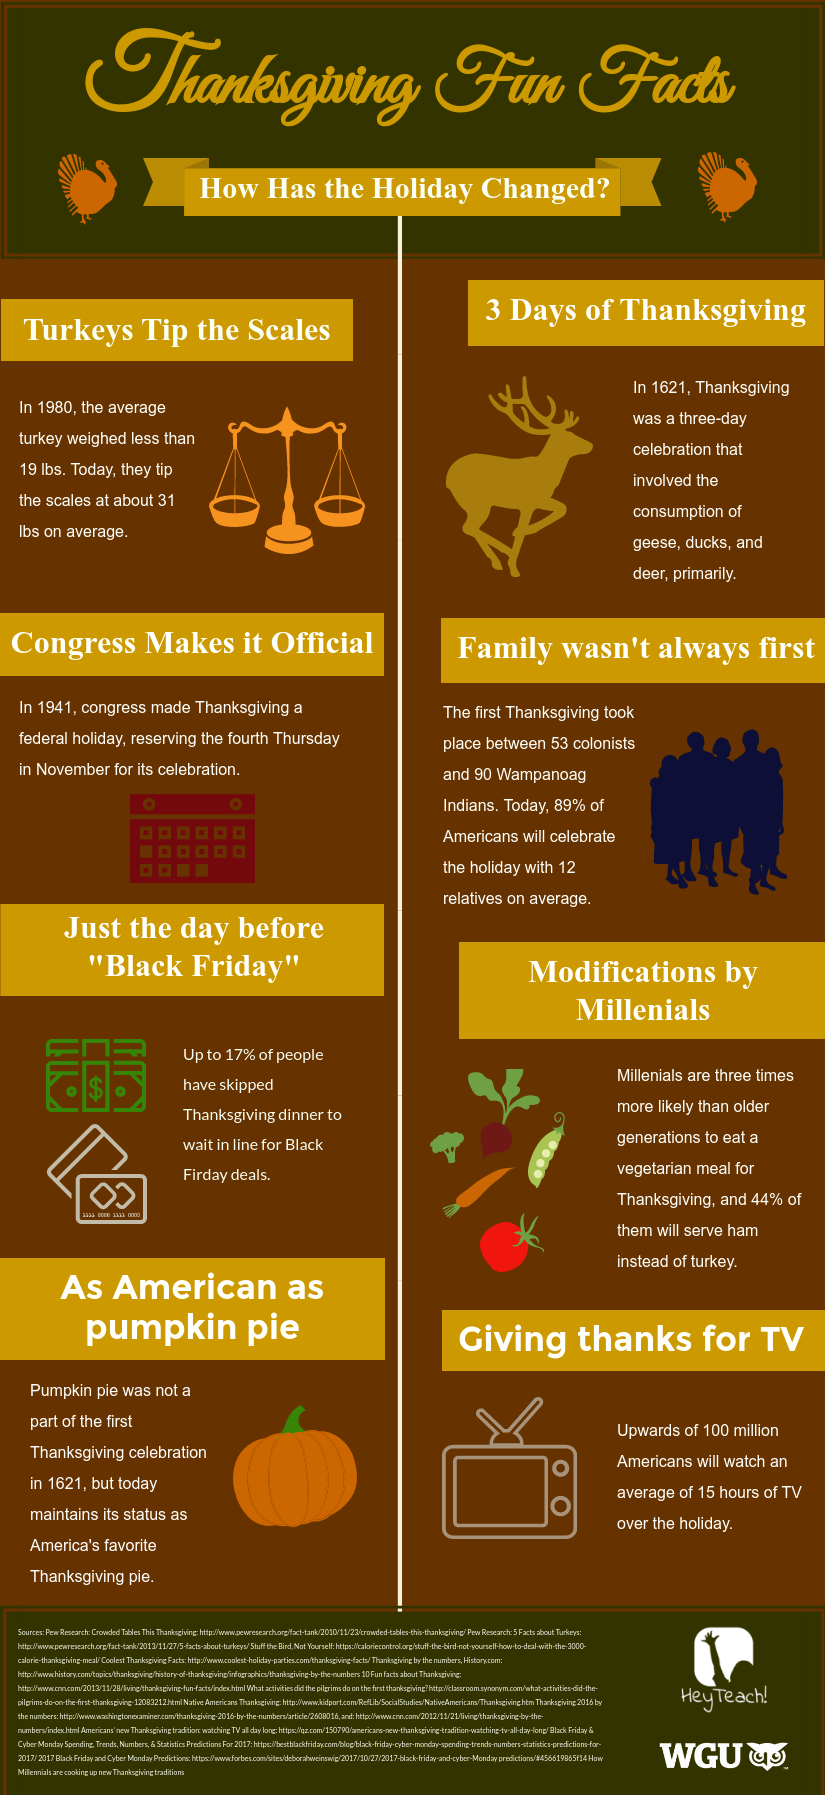 Share these fun Thanksgiving facts with students and loved ones